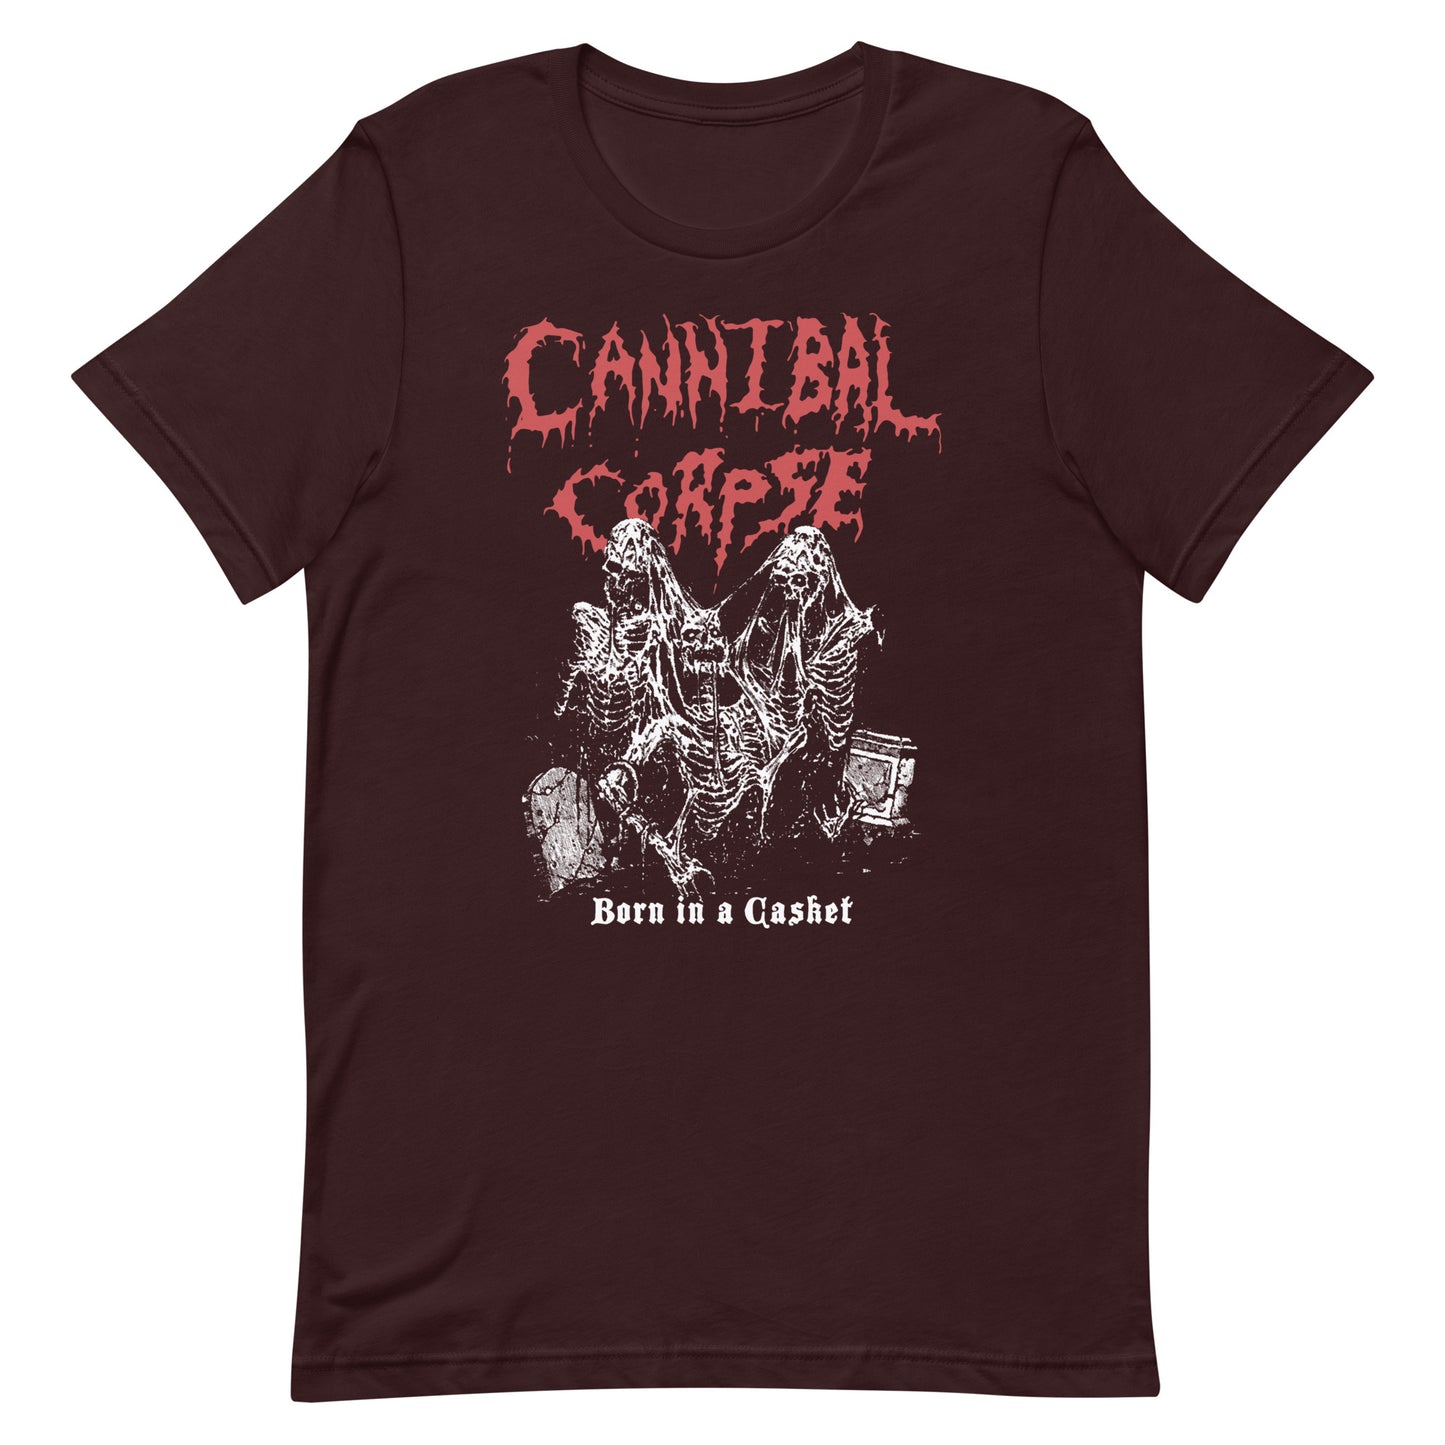 Cannibal Corpse - Born In A Casket T-Shirt